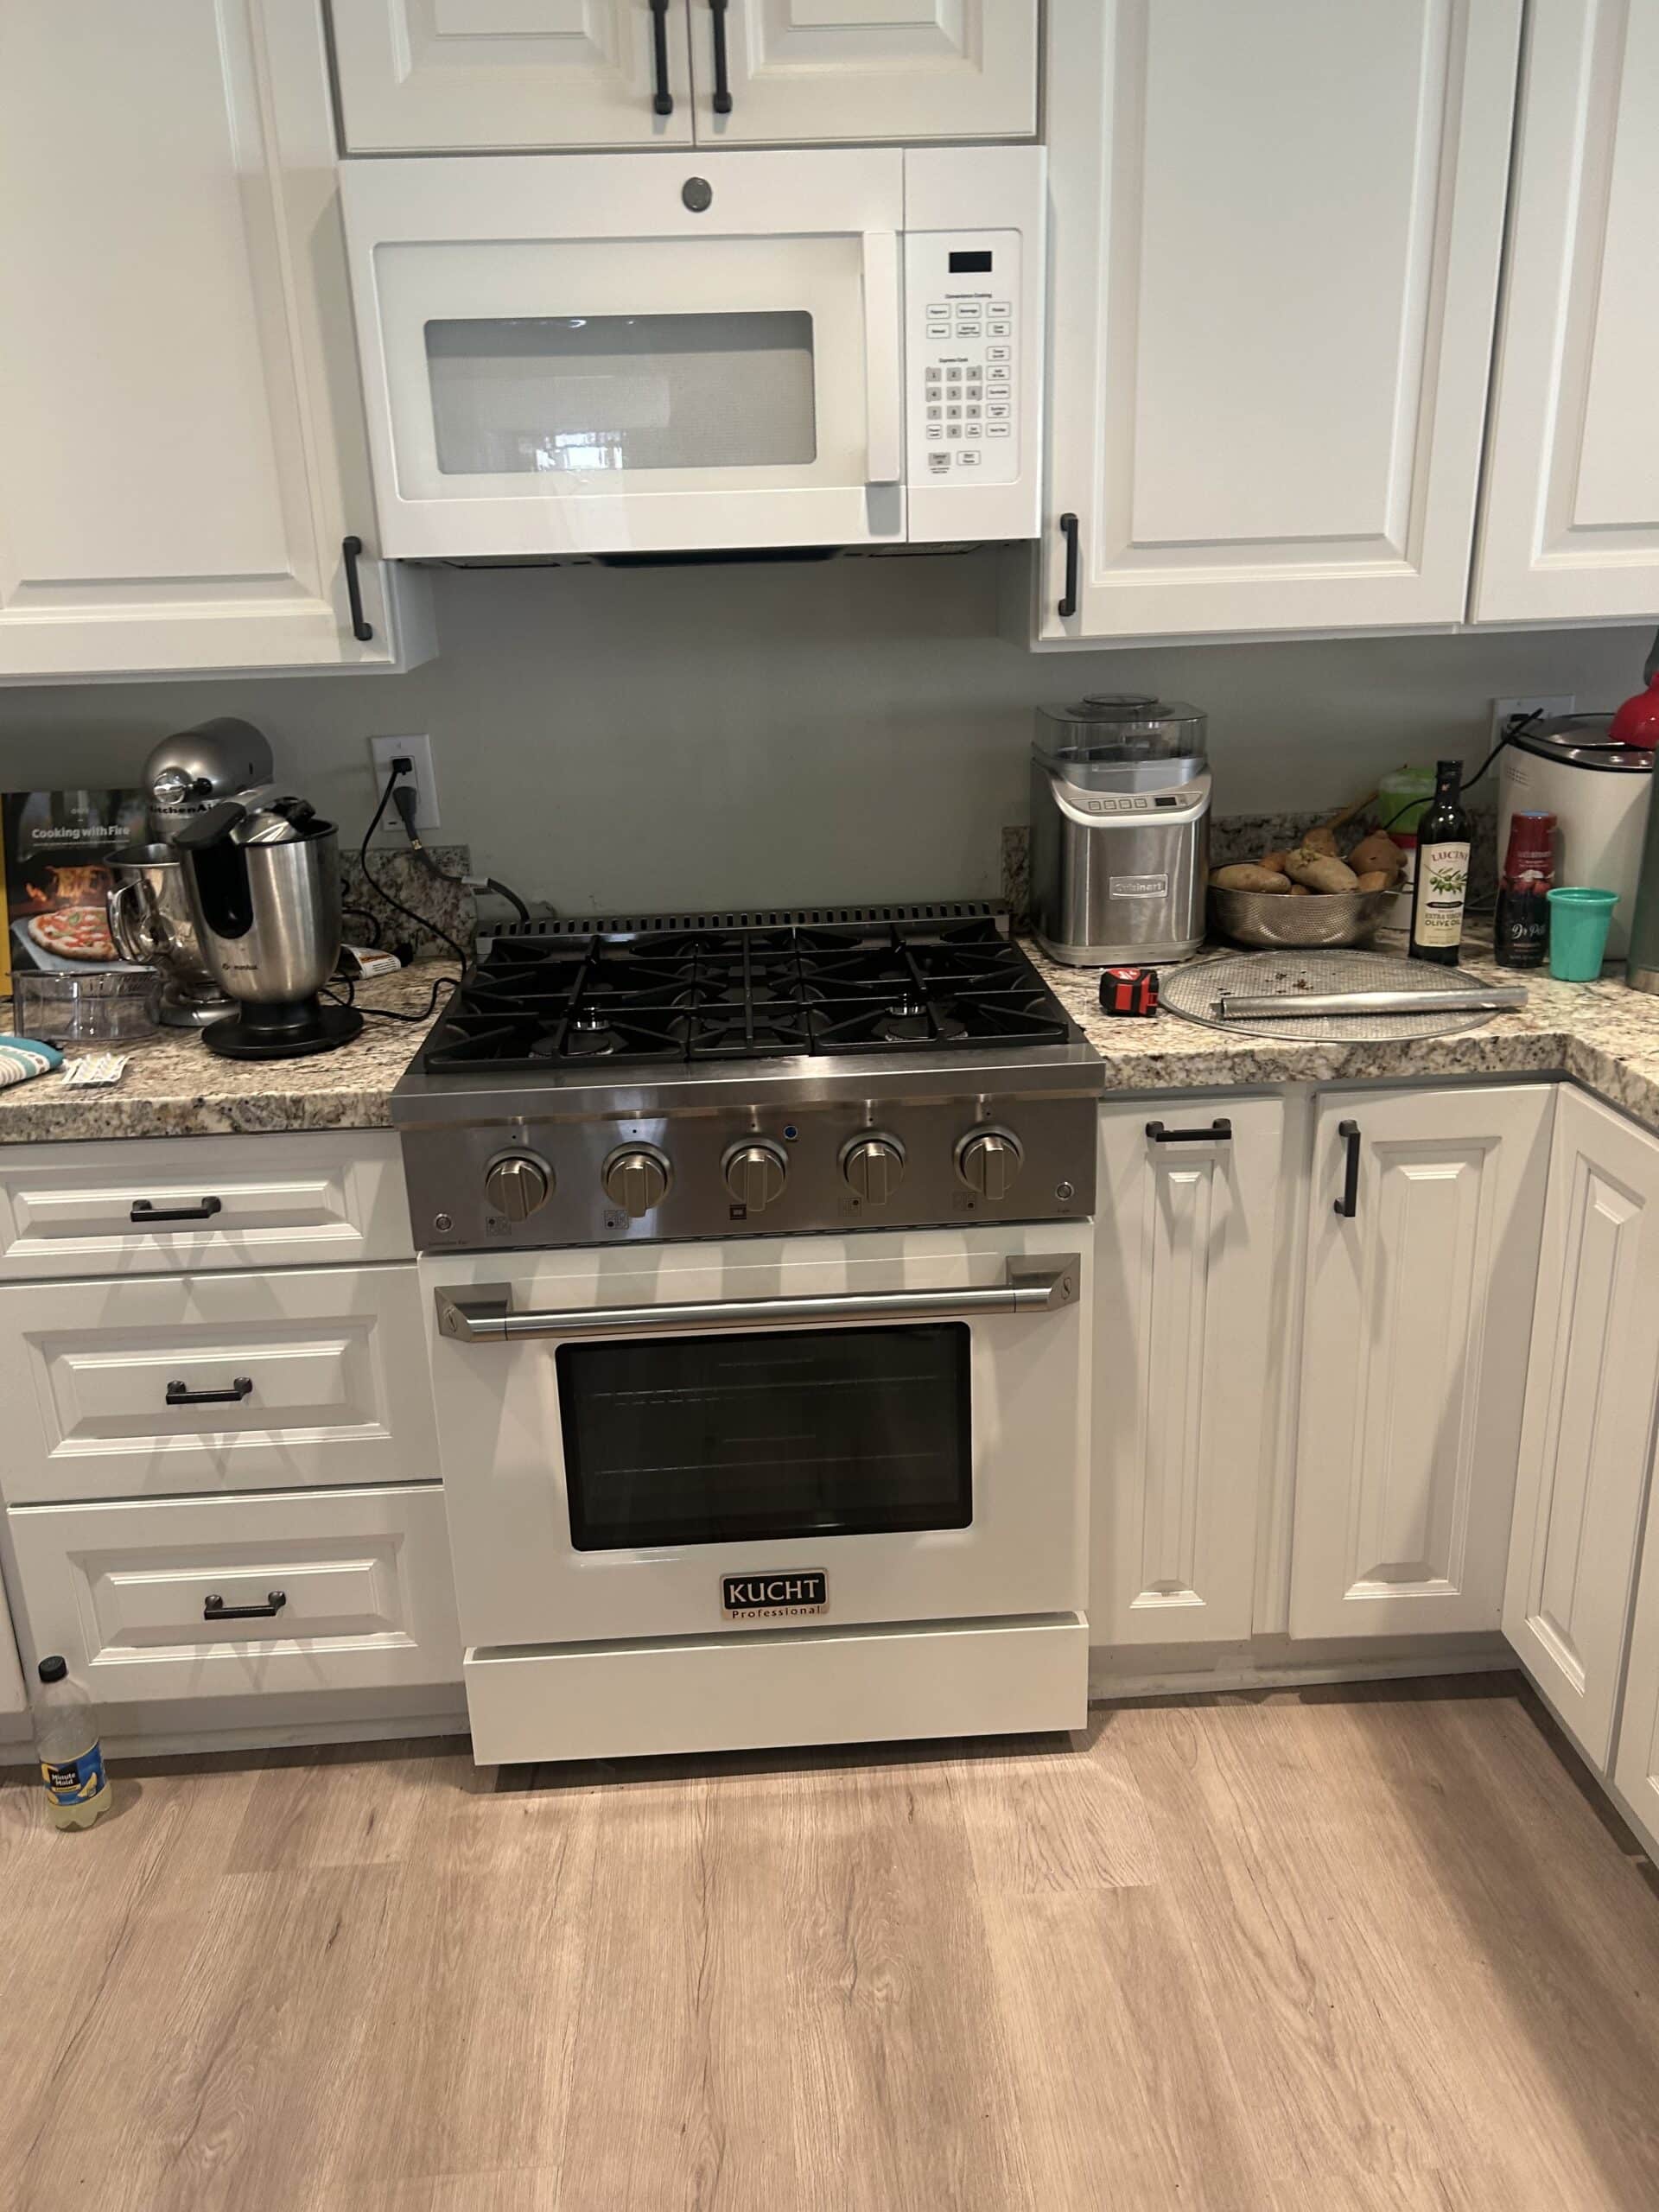 Oven removal